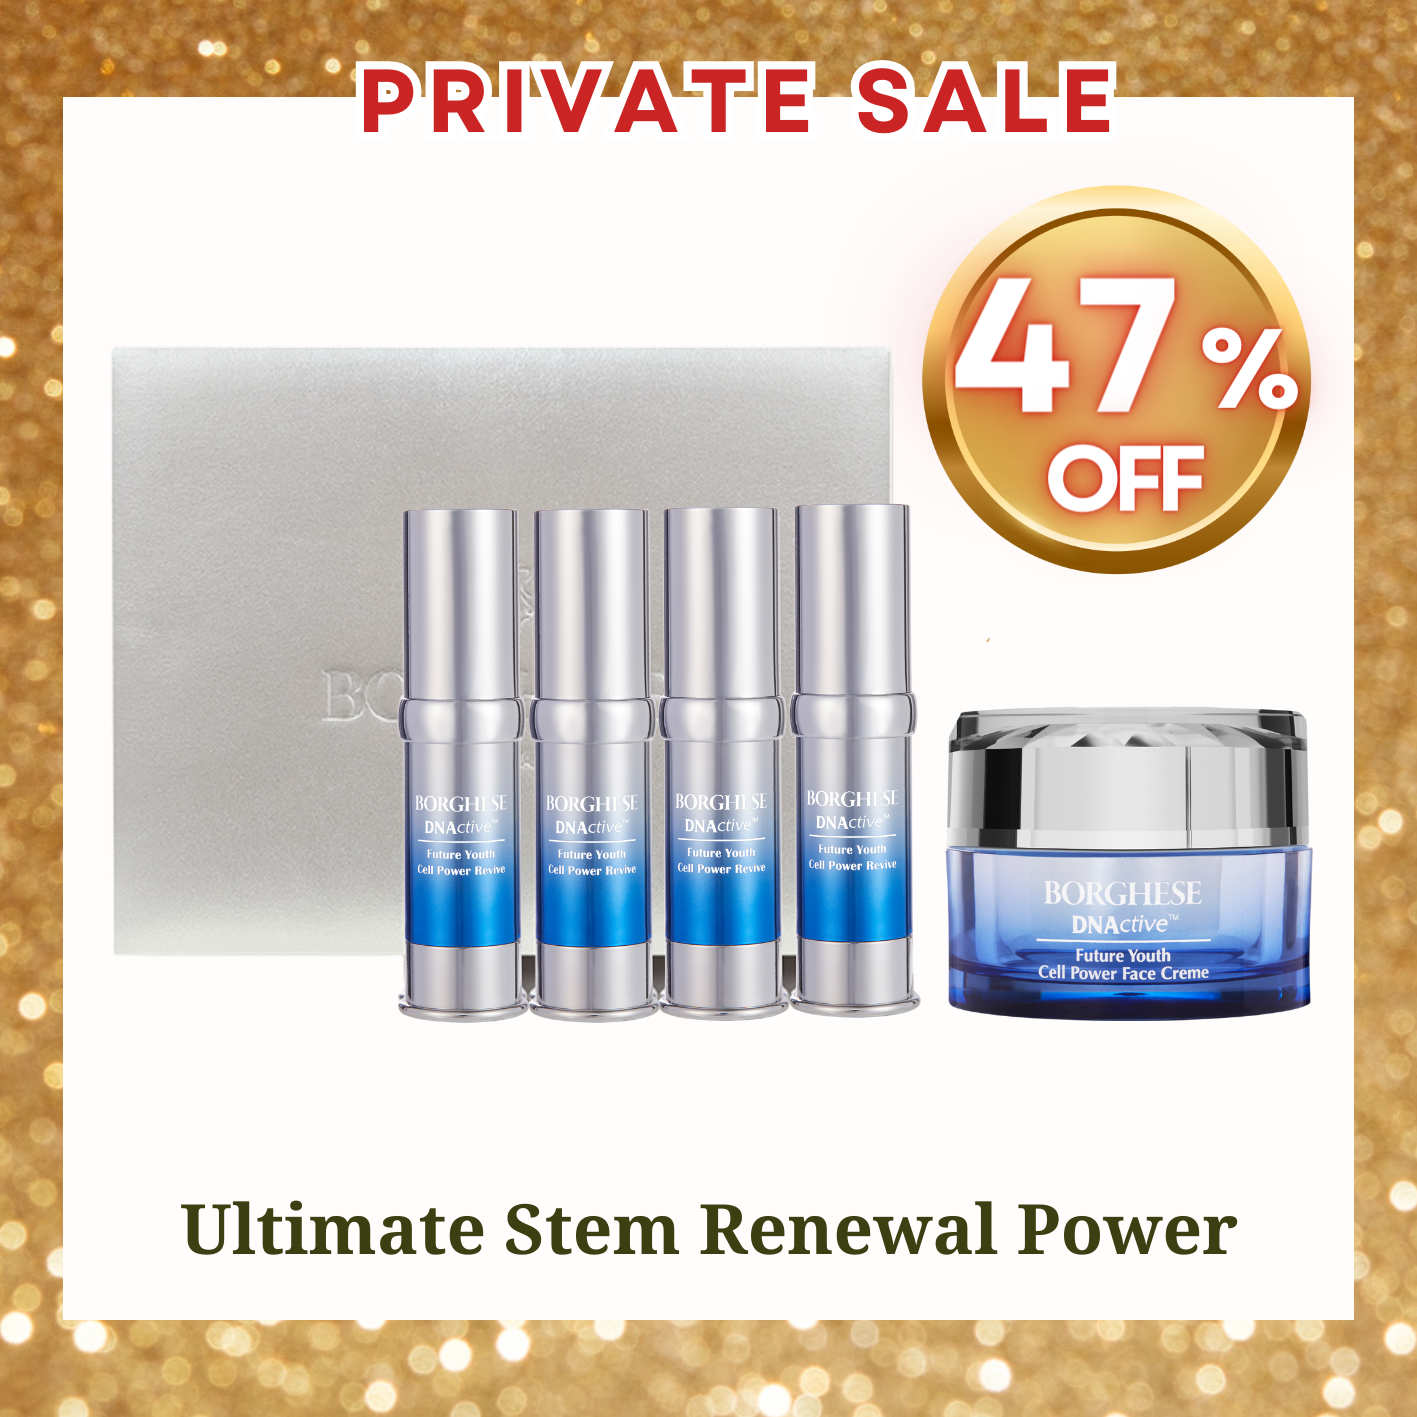 【Private Sale】DNActive™ Future Youth Cell Power Revive & Cream Set